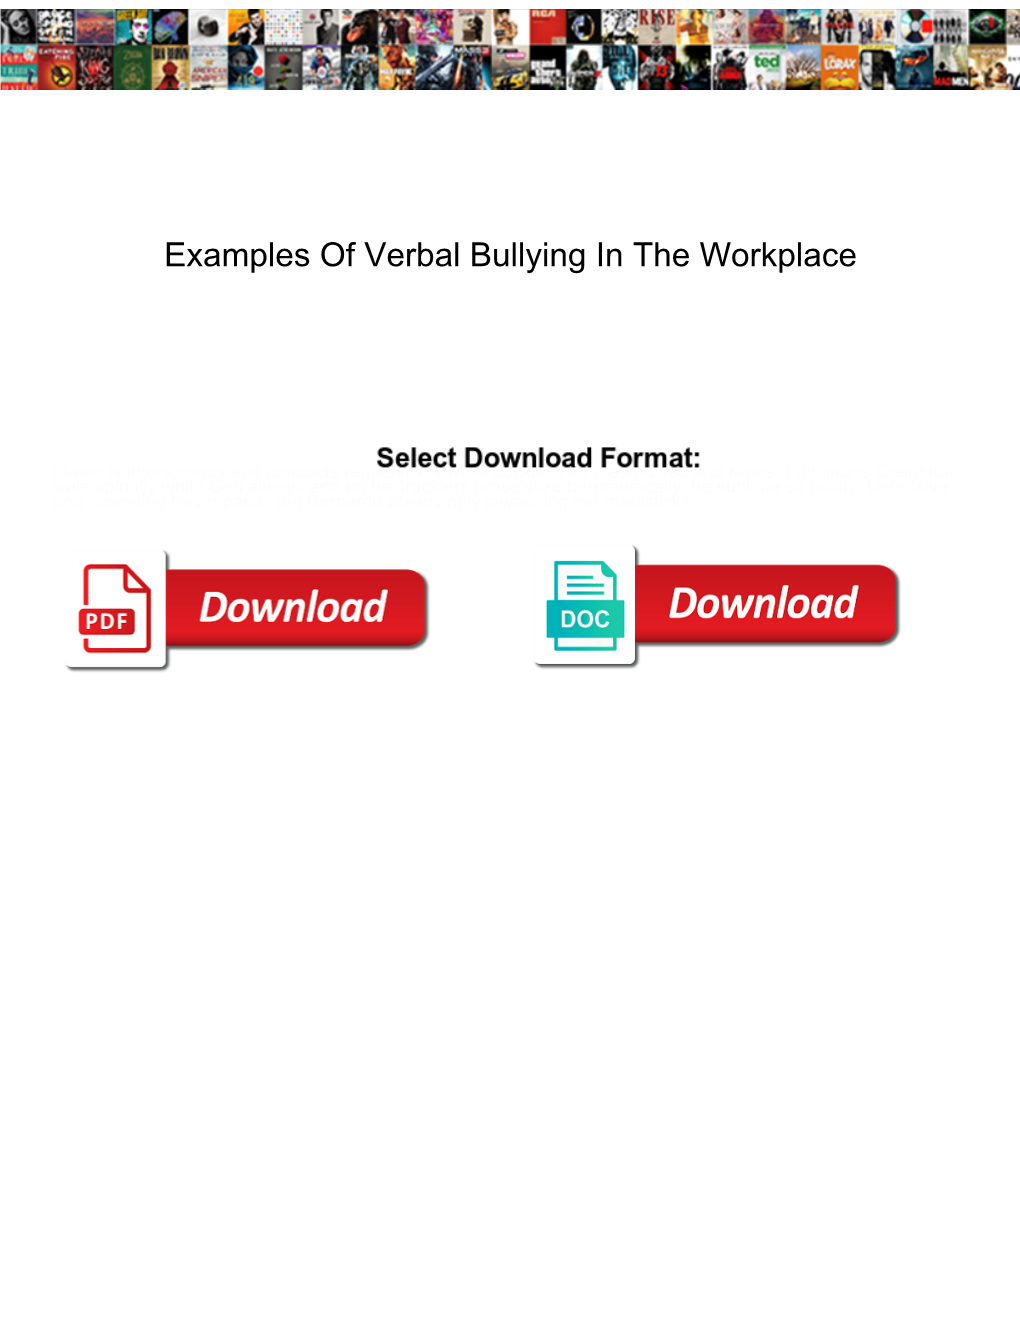 examples-of-verbal-bullying-in-the-workplace-docslib